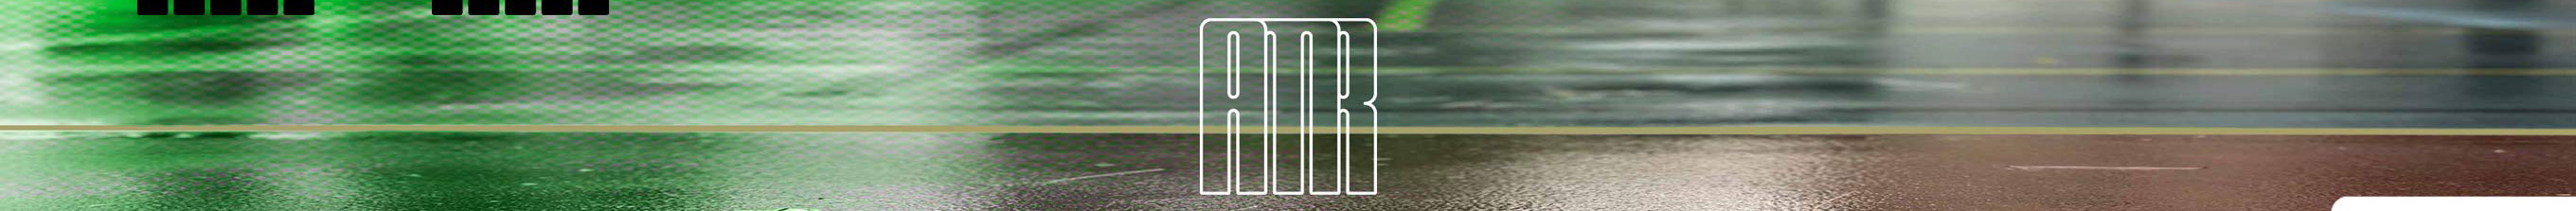 ANOTHERMATTRYAN A.M.R's profile banner